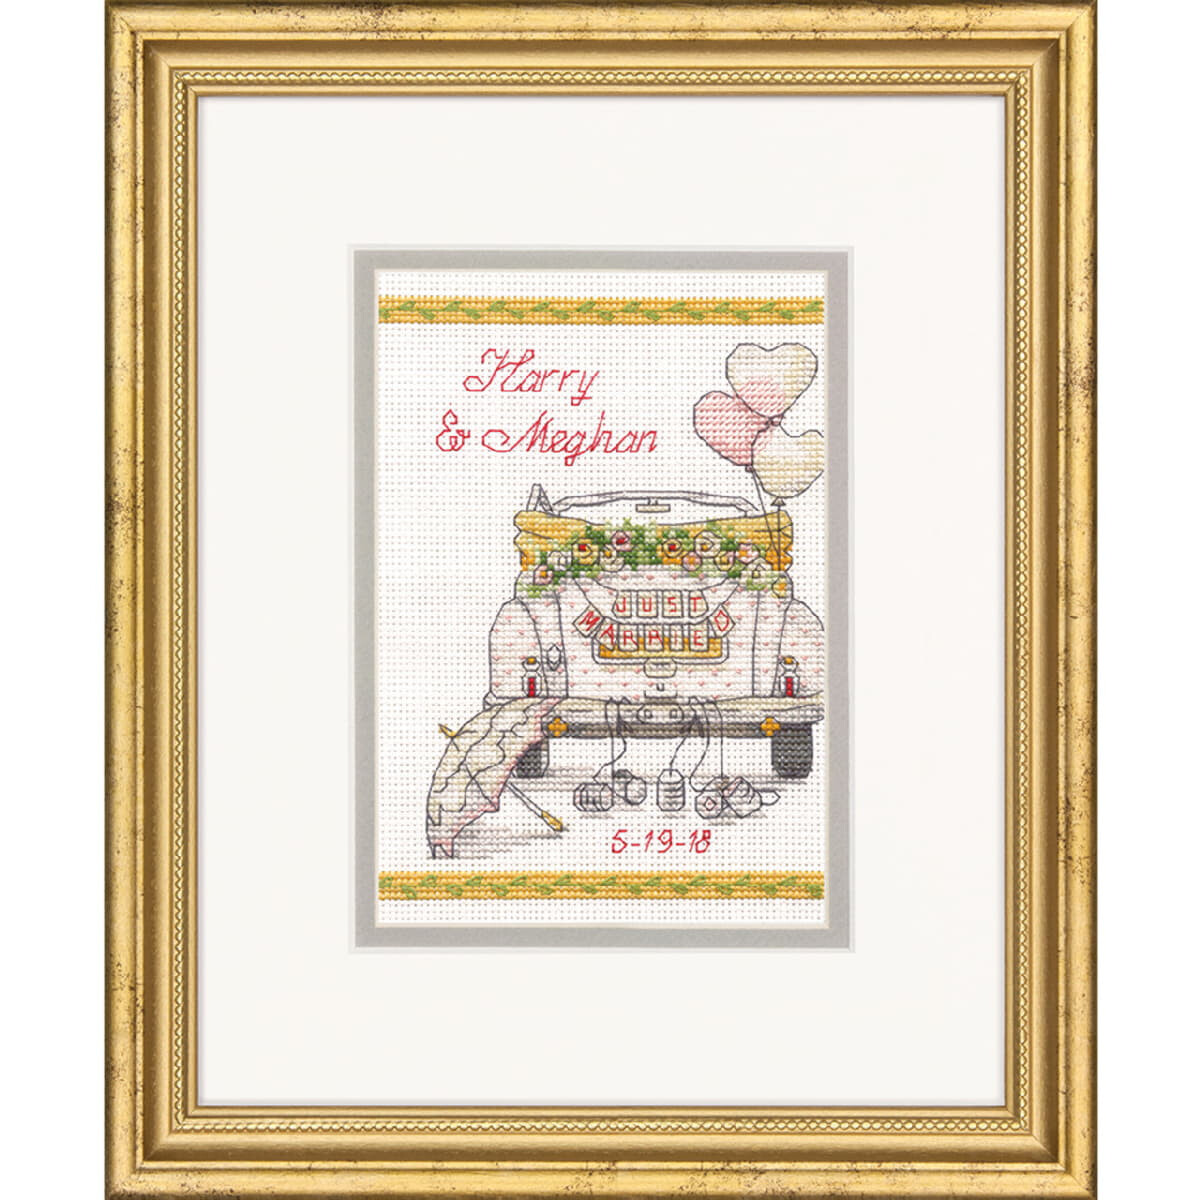 Dimensions counted cross stitch kit "Wedding...